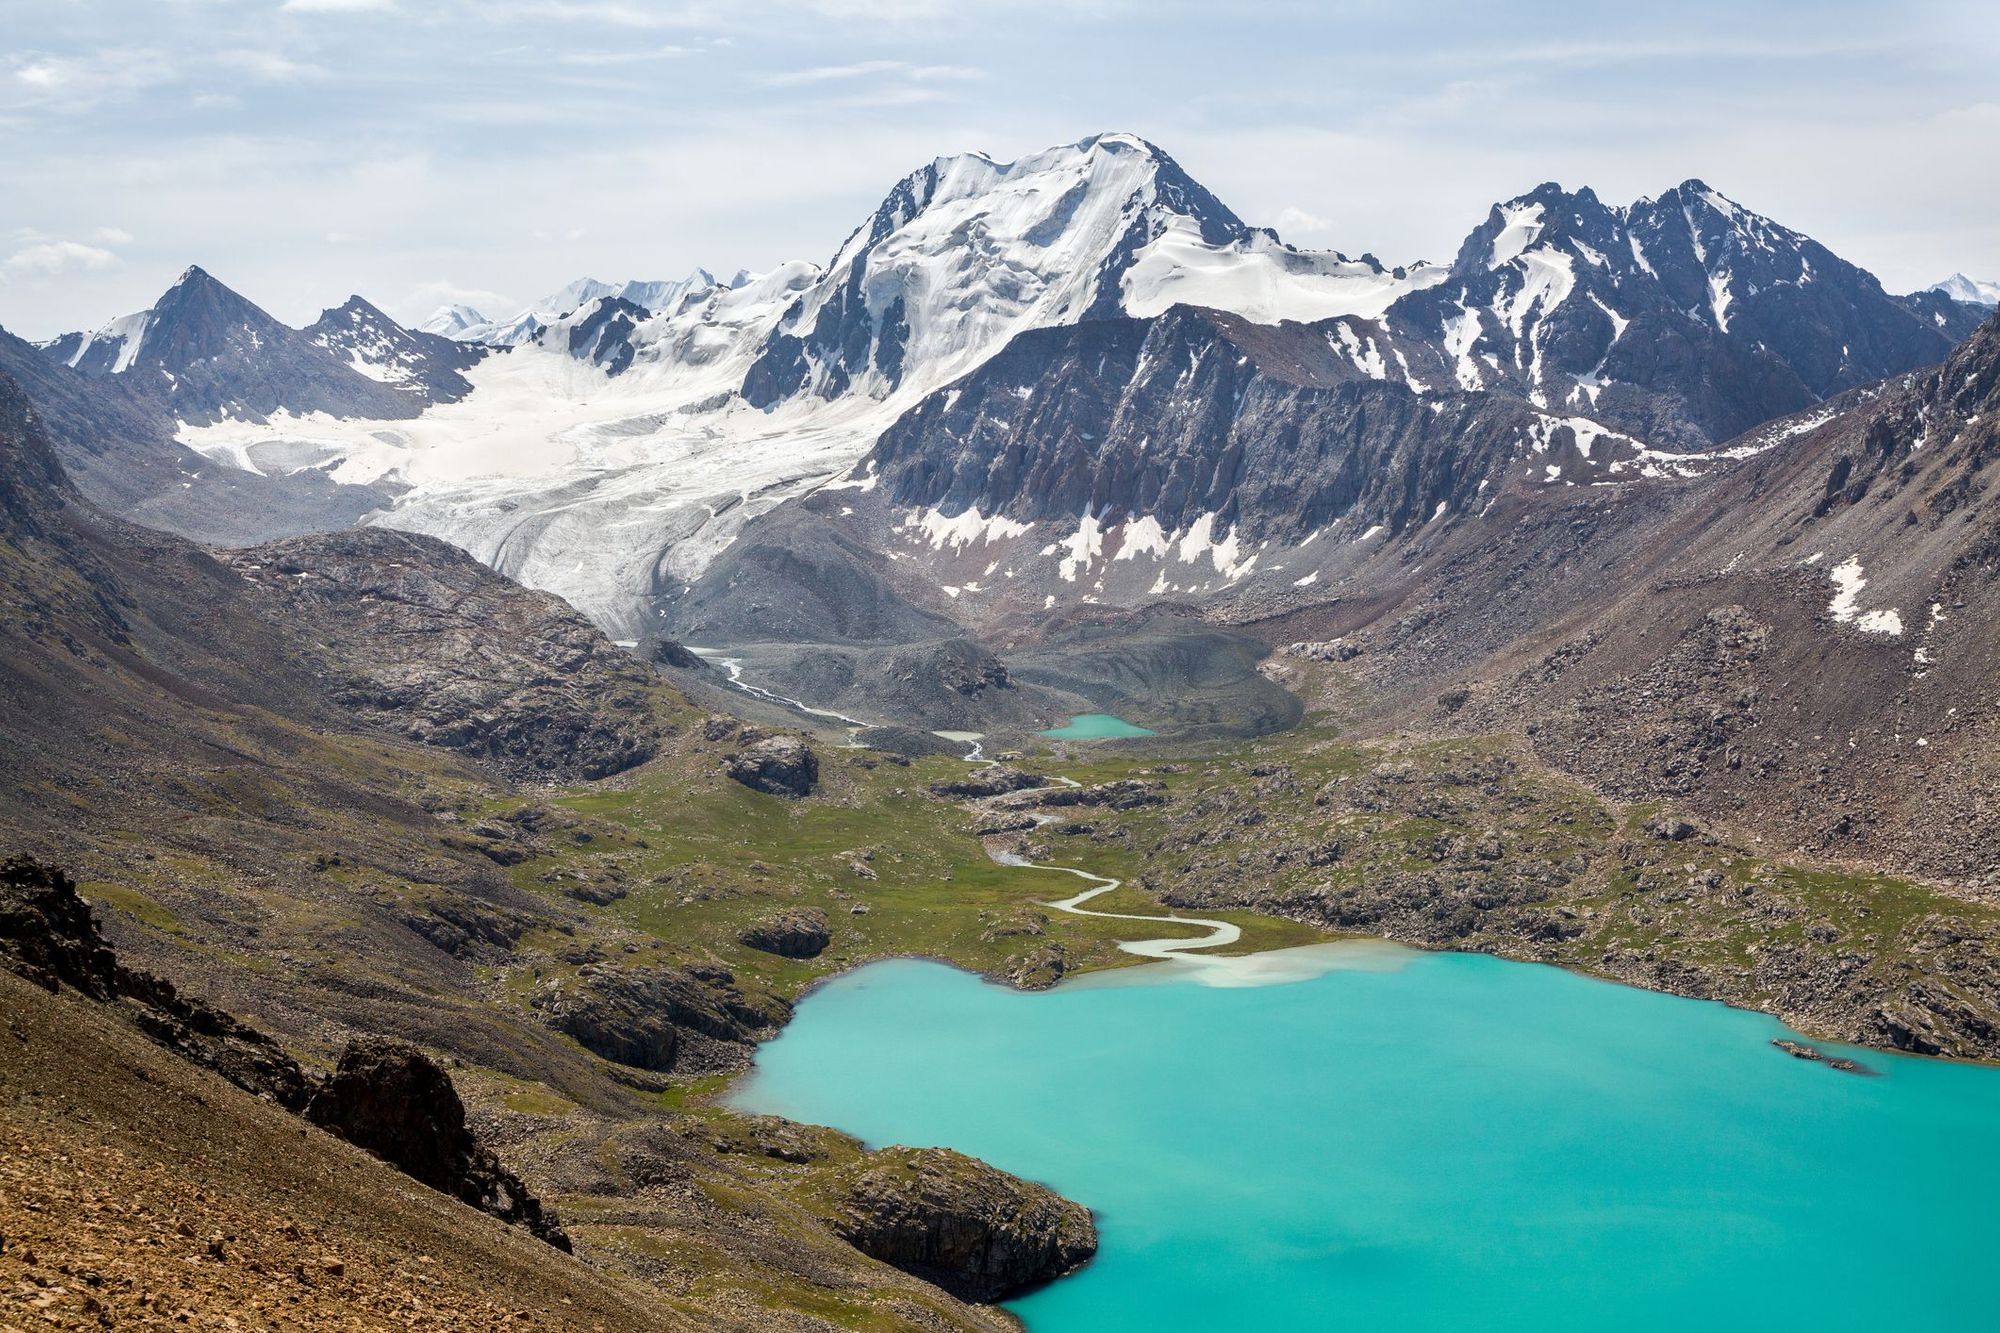 The brilliant blue Ala-Köl Lake in the Tian Shan mountains.